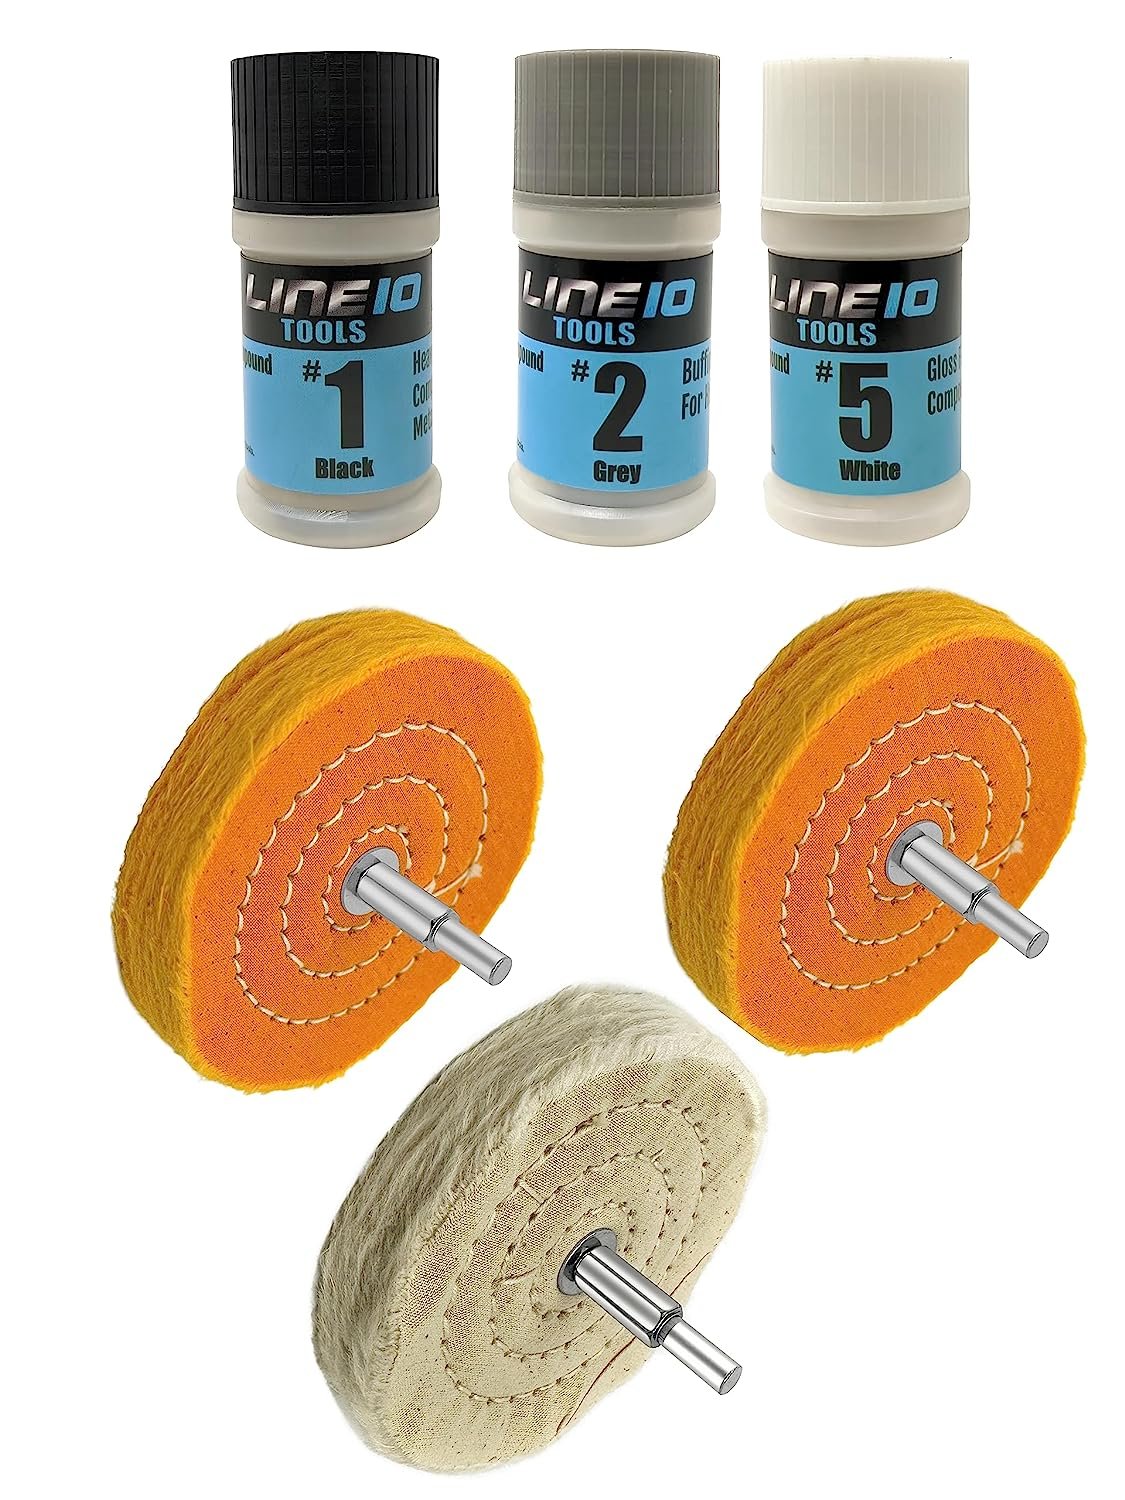 LINE10 Tools Metal Buffing Wheel Kit for Drill, with 3 Step Polishing Compound